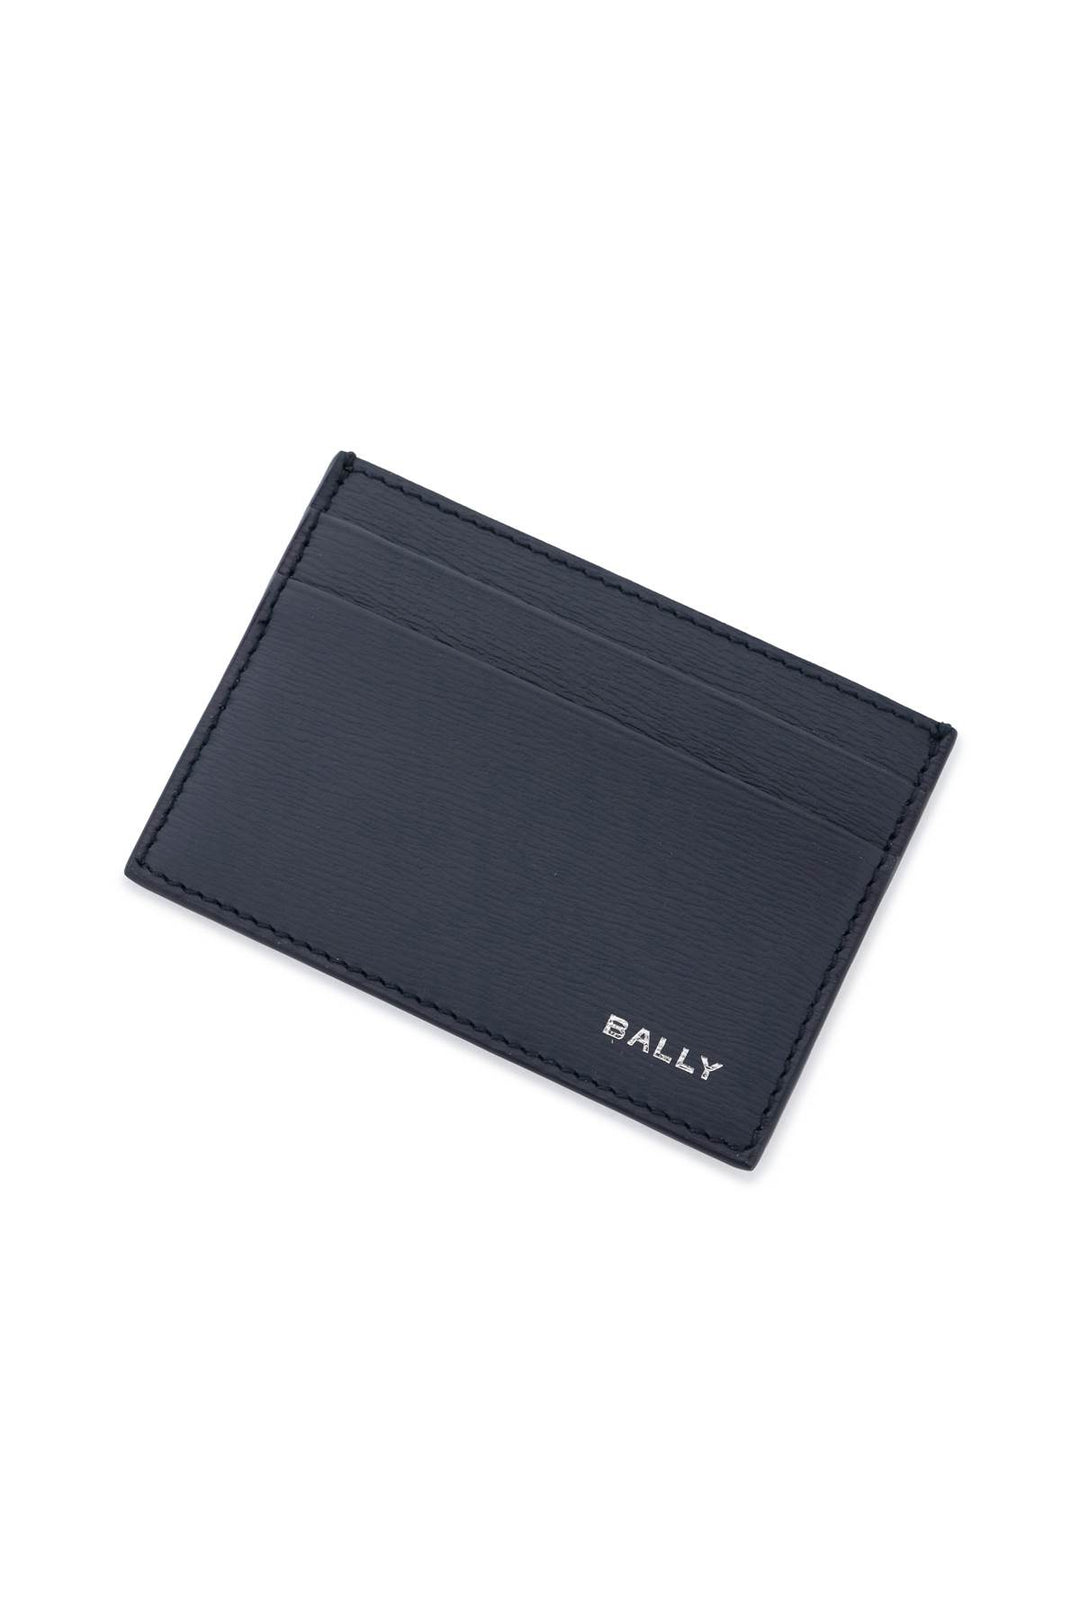 Bally leather crossing cardholder-1